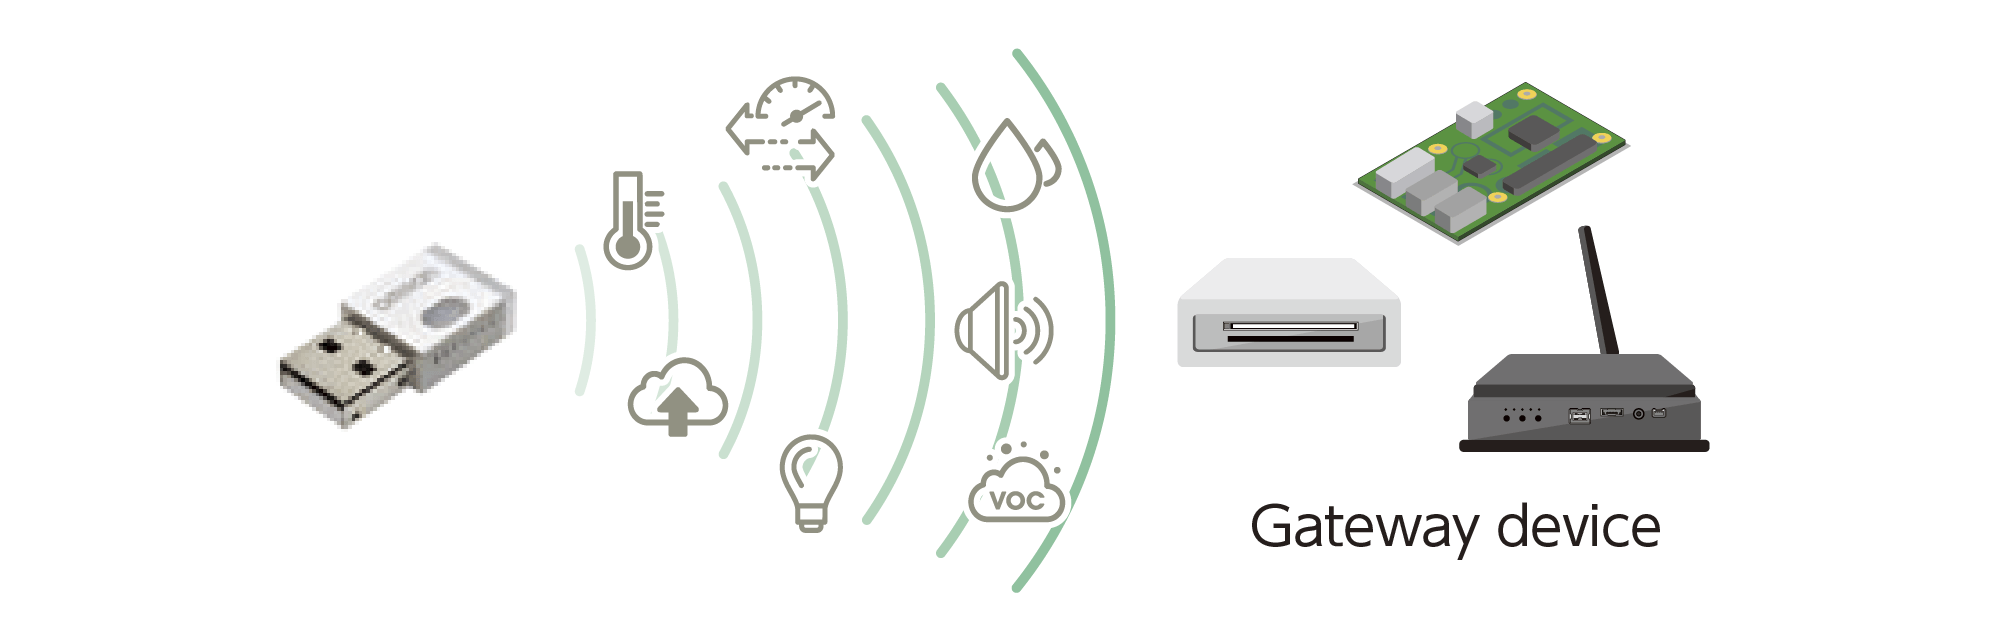 Sending of data to IoT gateway devices